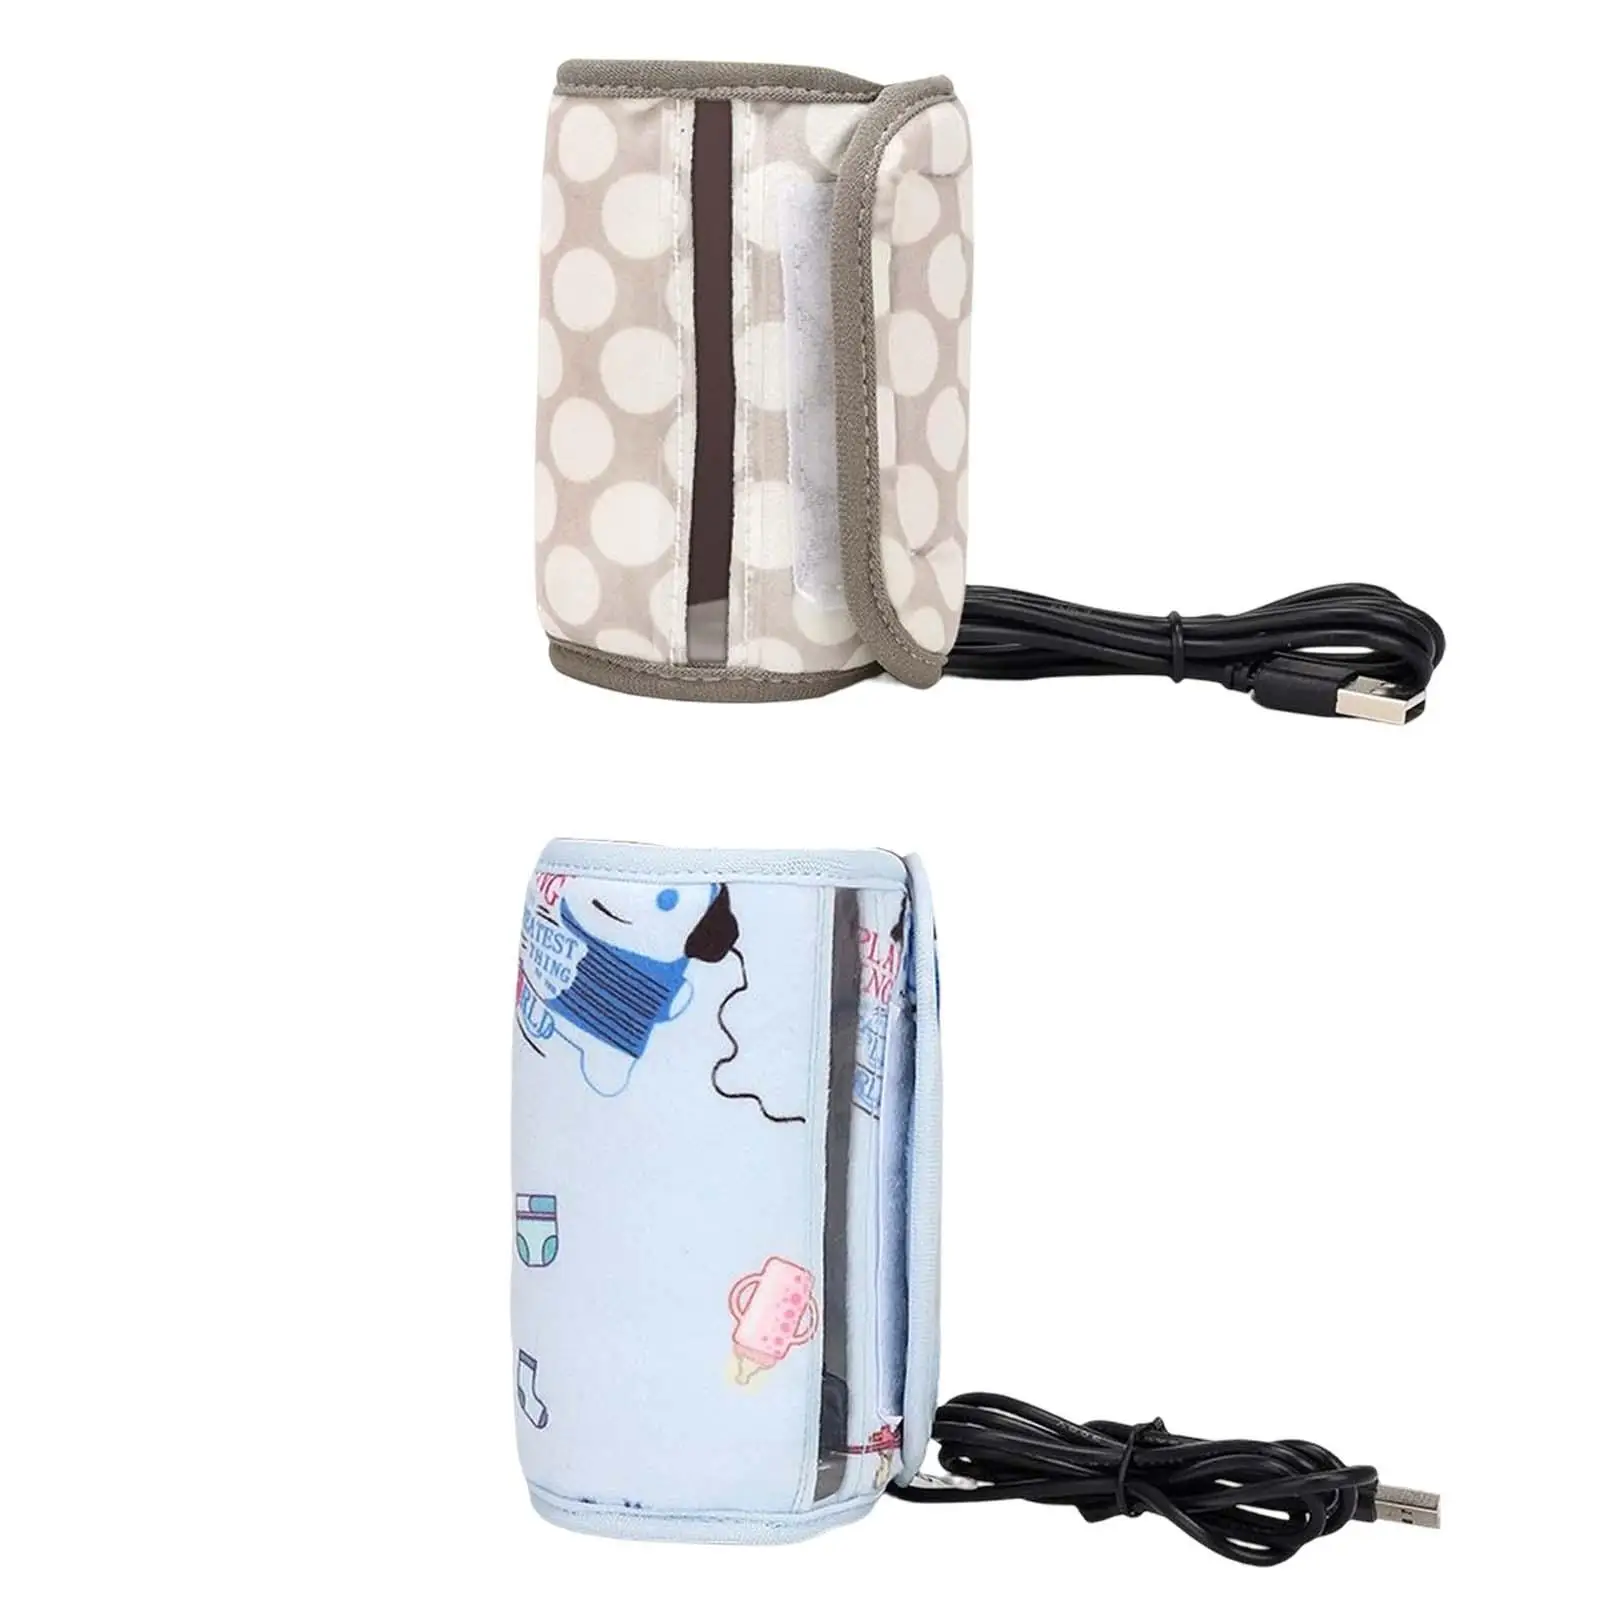 

Portable Baby Bottle Warmer Insulated Nursing Thermostat Milk Heating Keeper Travel Heater Bag for Indoor Outdoor Home Infant